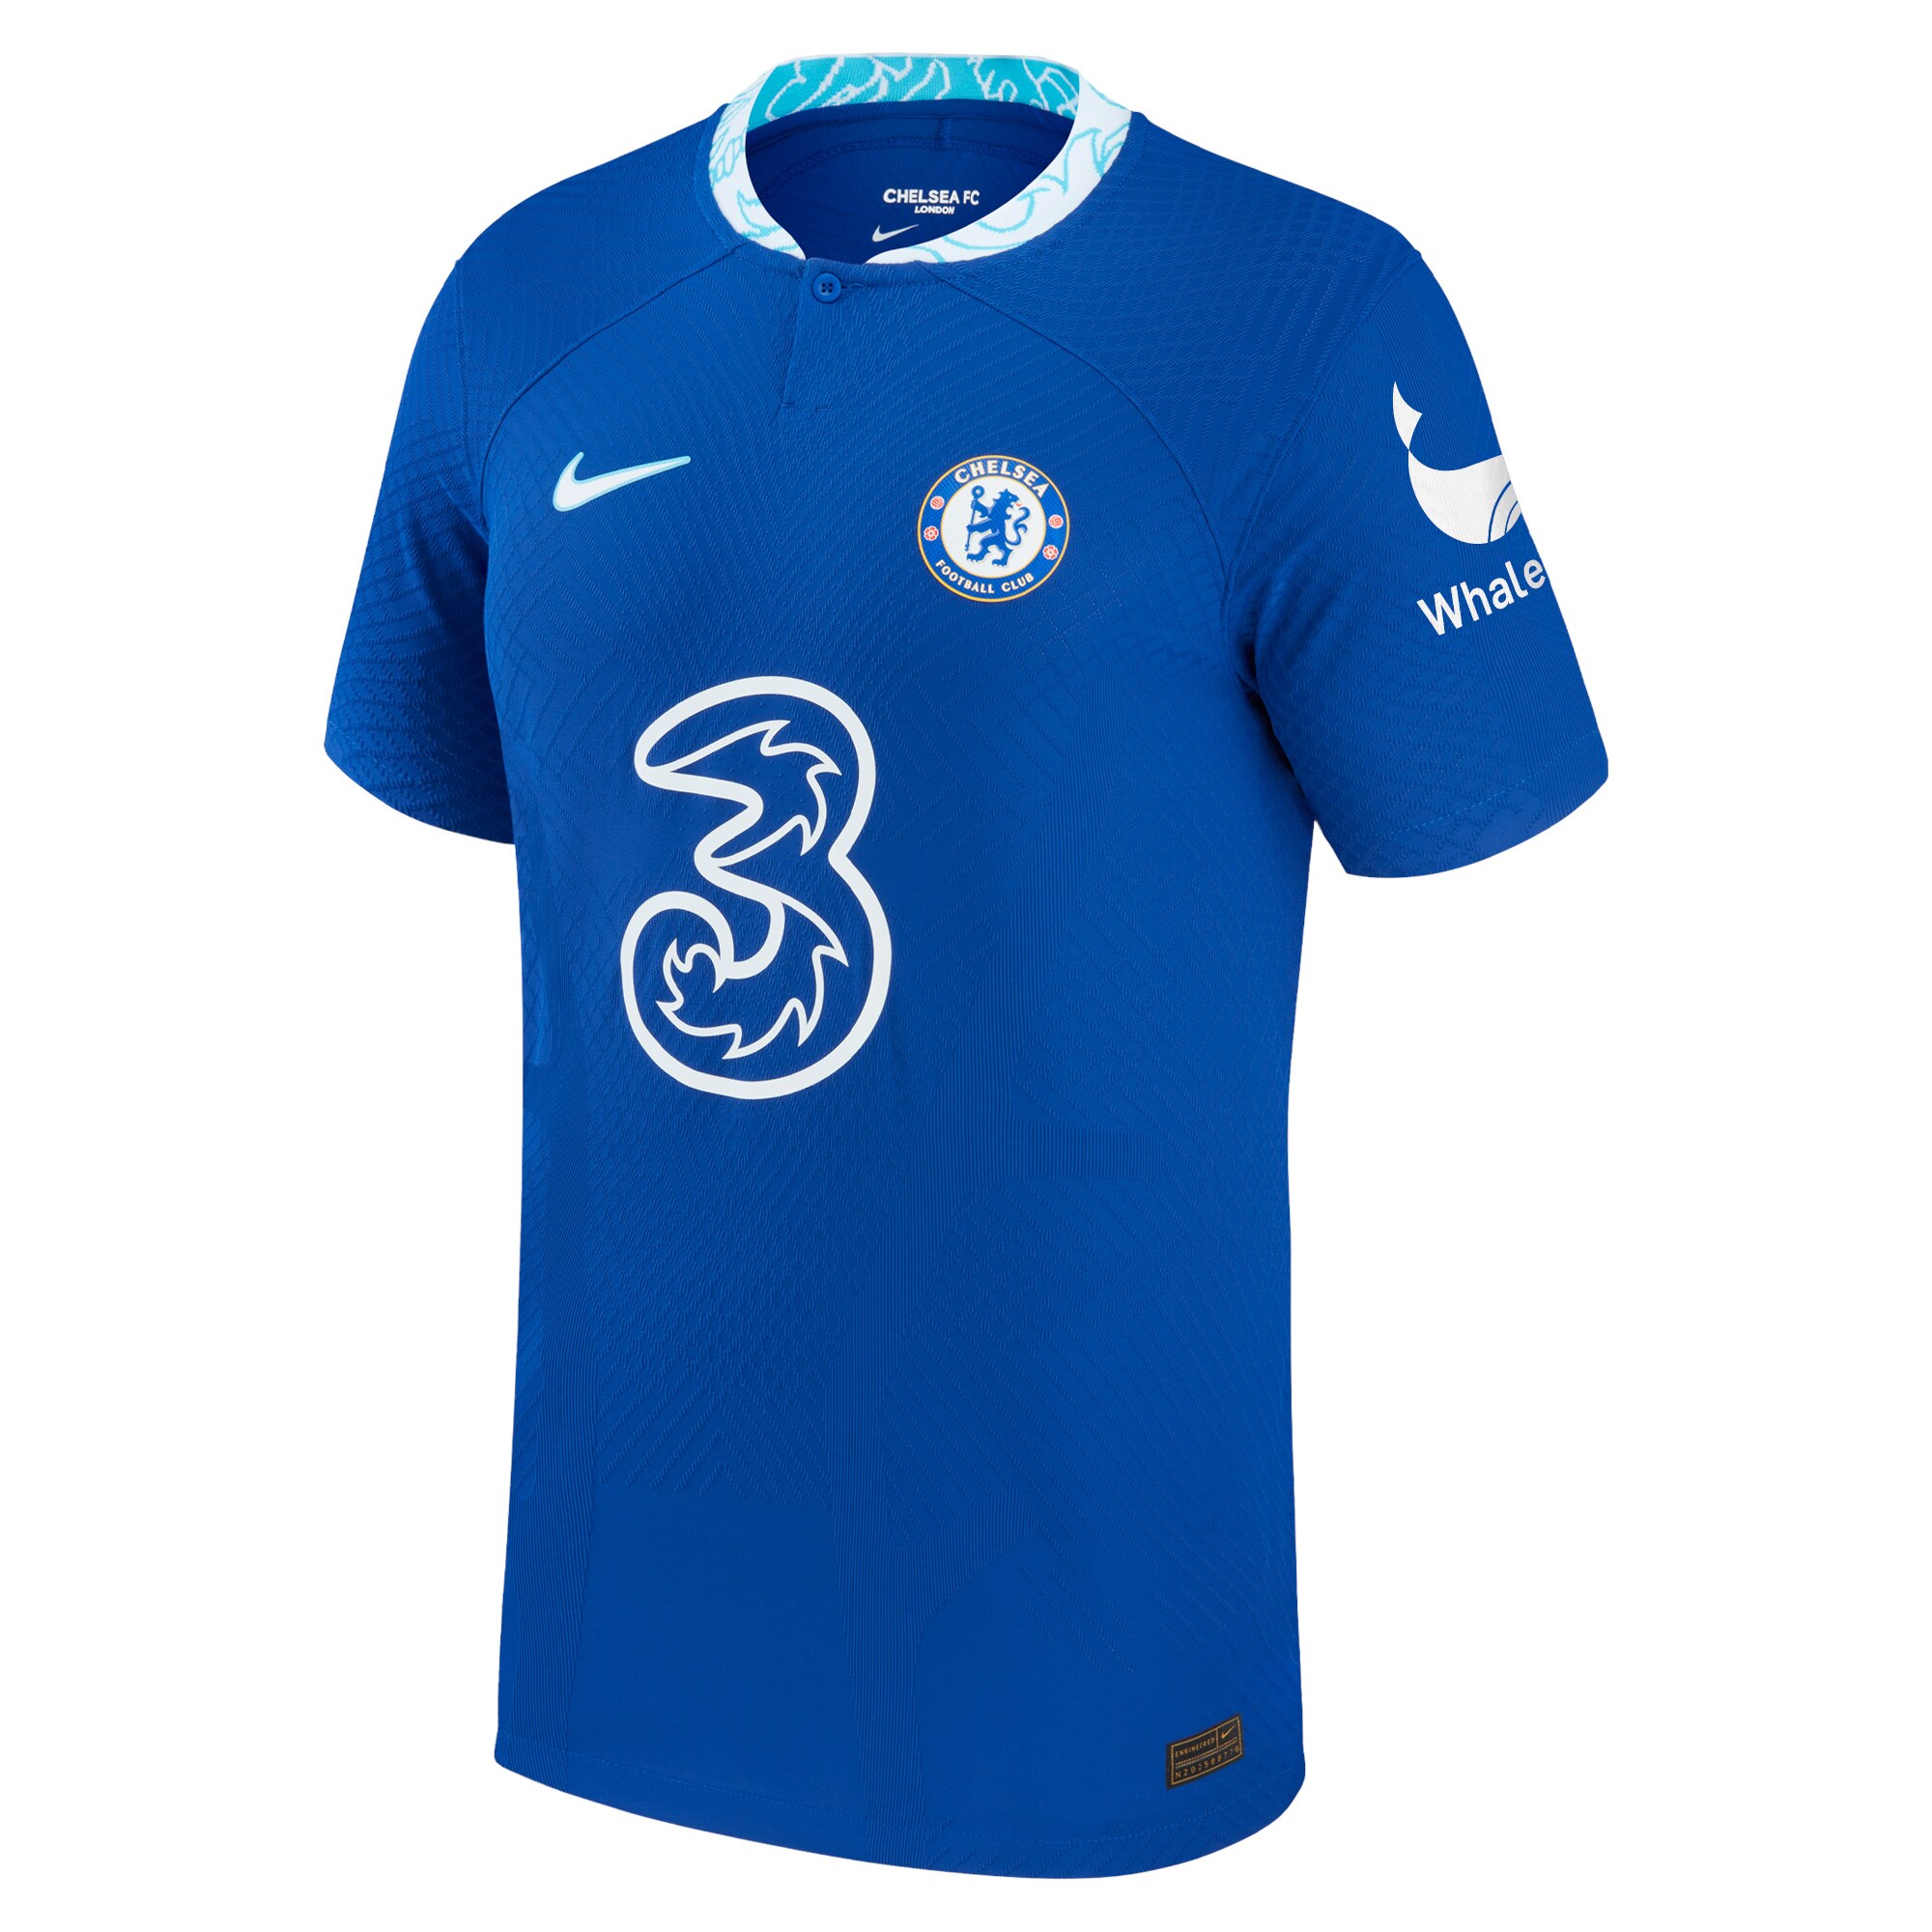 Chelsea Home Vapor Match Shirt 2022-23 with Emerson 33 printing